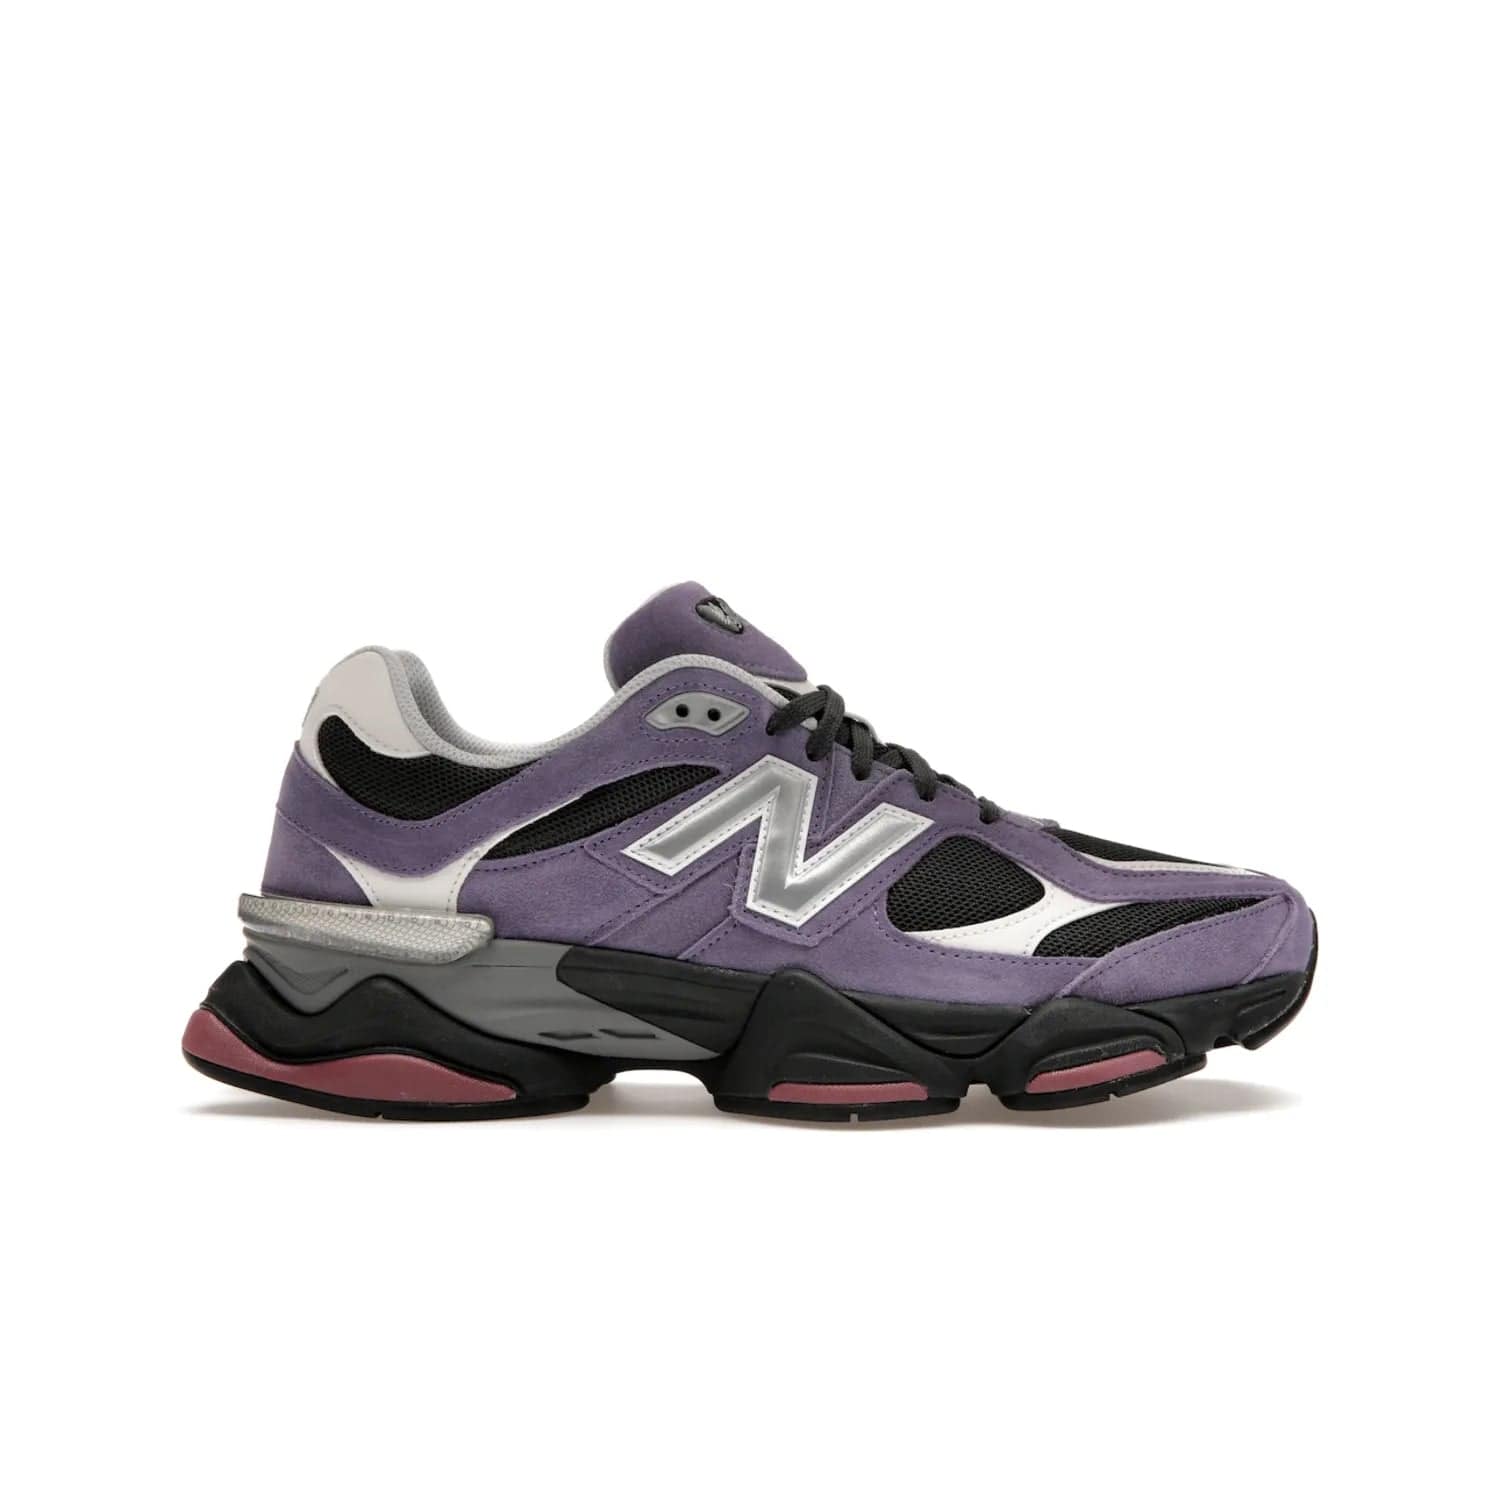 New Balance 9060 Violet Noir - Image 1 - Only at www.BallersClubKickz.com - Experience urban exploration in stylish comfort with the New Balance 9060 Violet Noir. Crafted with an exquisite blend of colors, this pair is perfect for an adventurous city stroll or casual hangouts. Enjoy all-day comfort and make a statement with the New Balance 9060 Violet Noir.